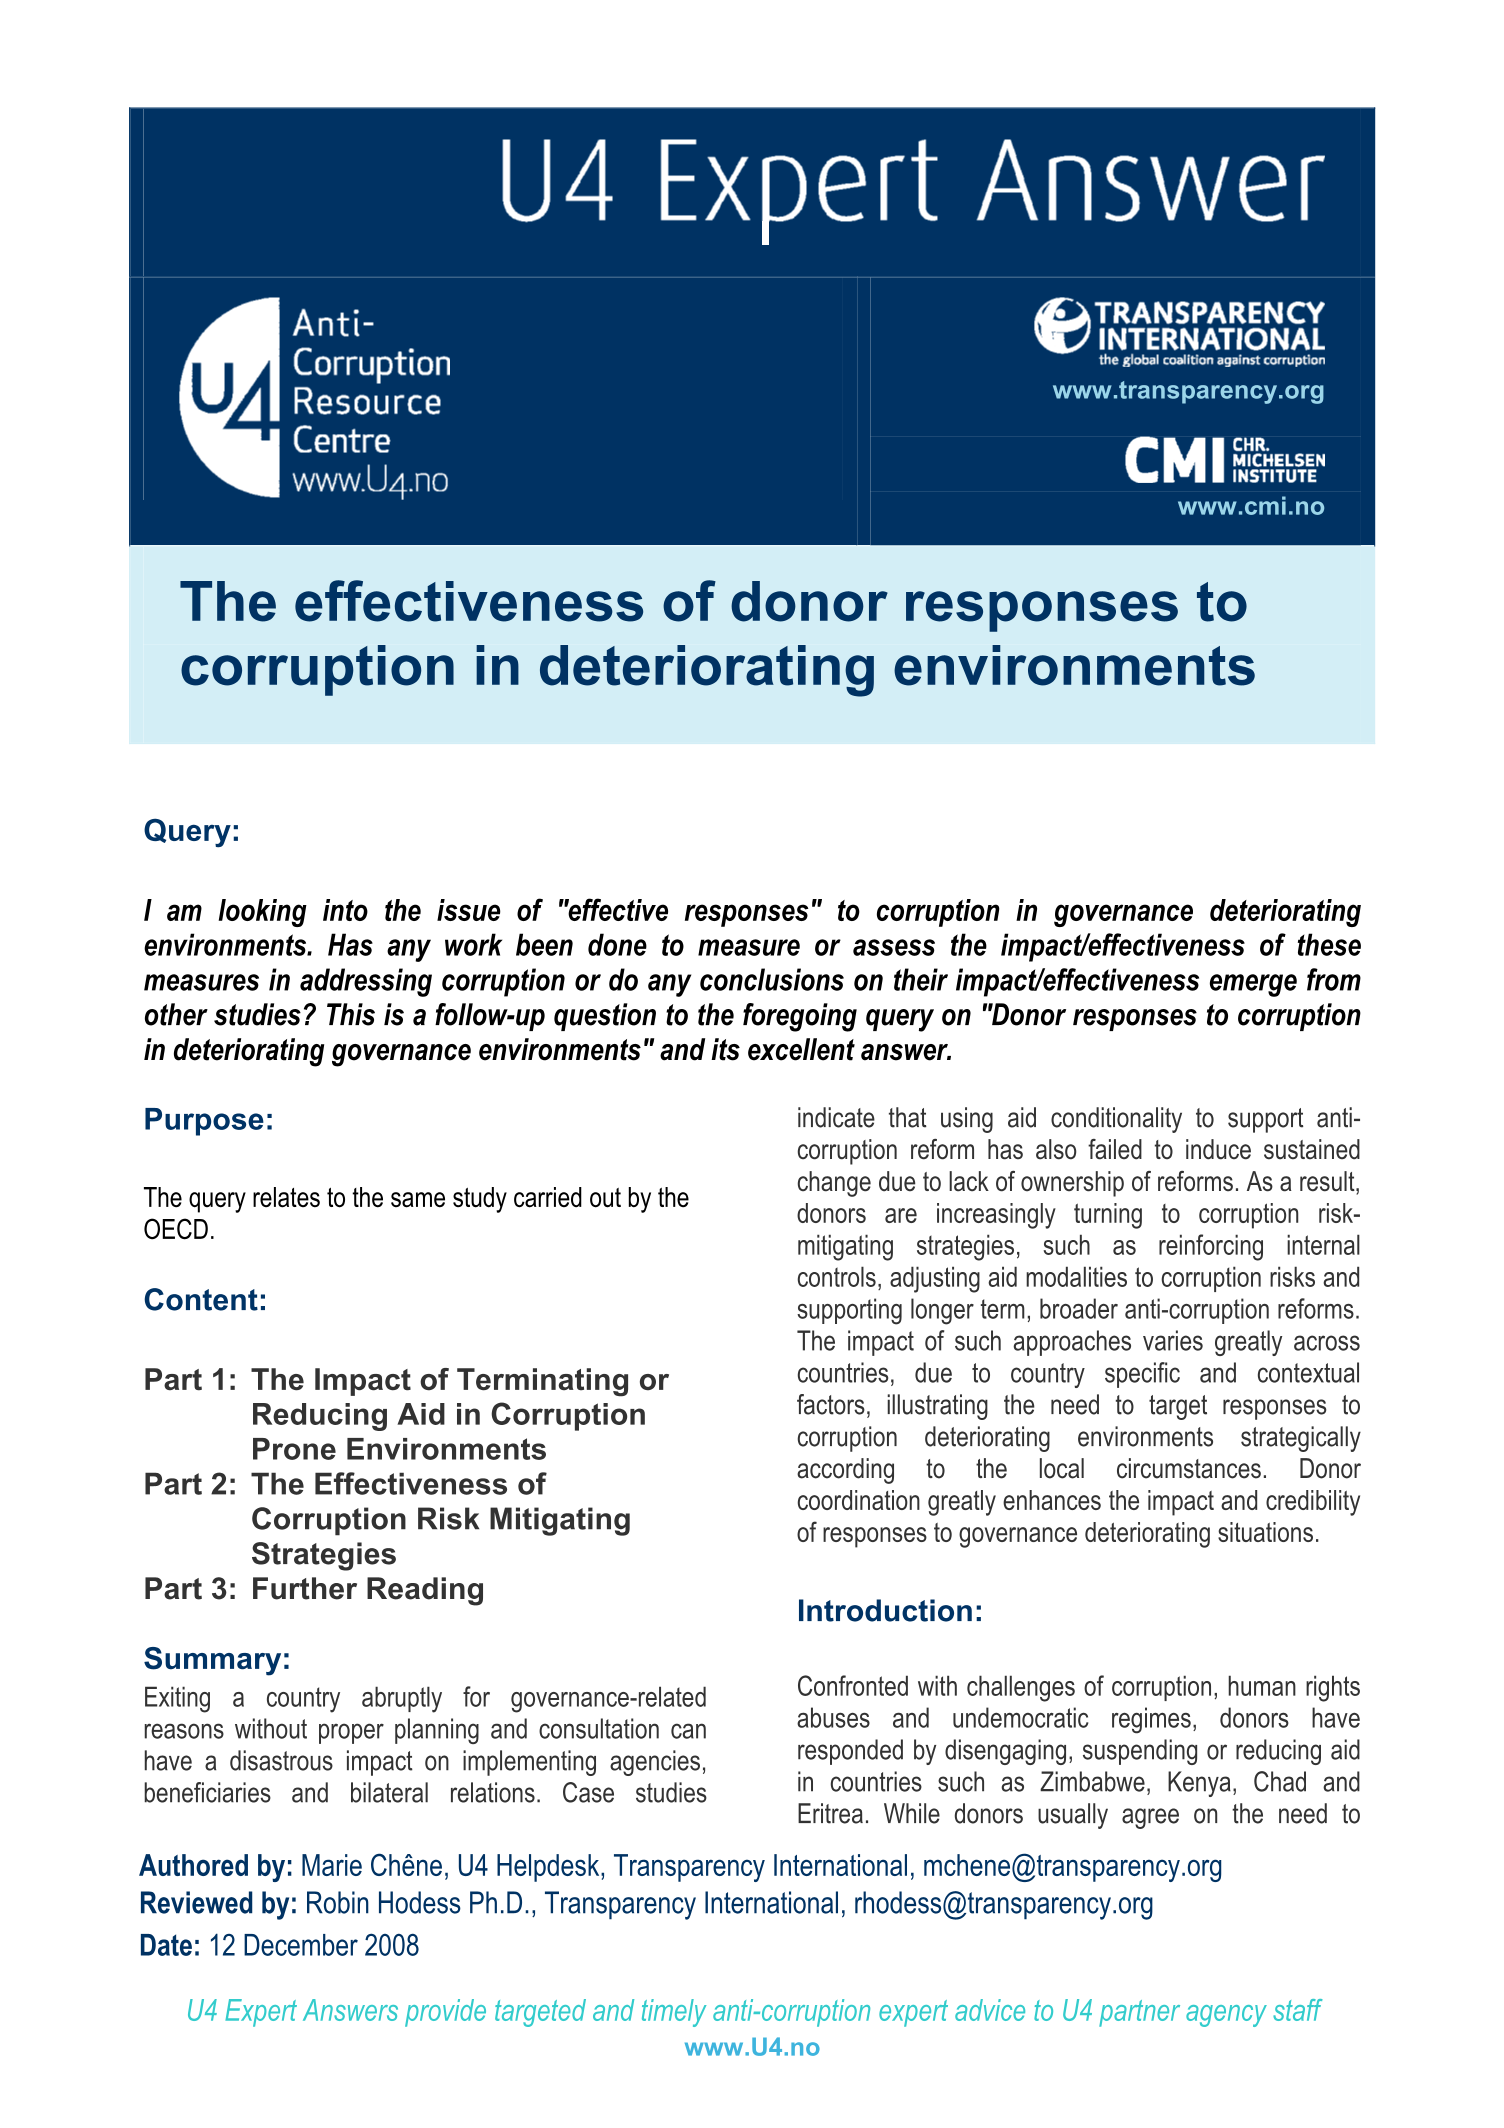 The effectiveness of donor responses to corruption in deteriorating environments